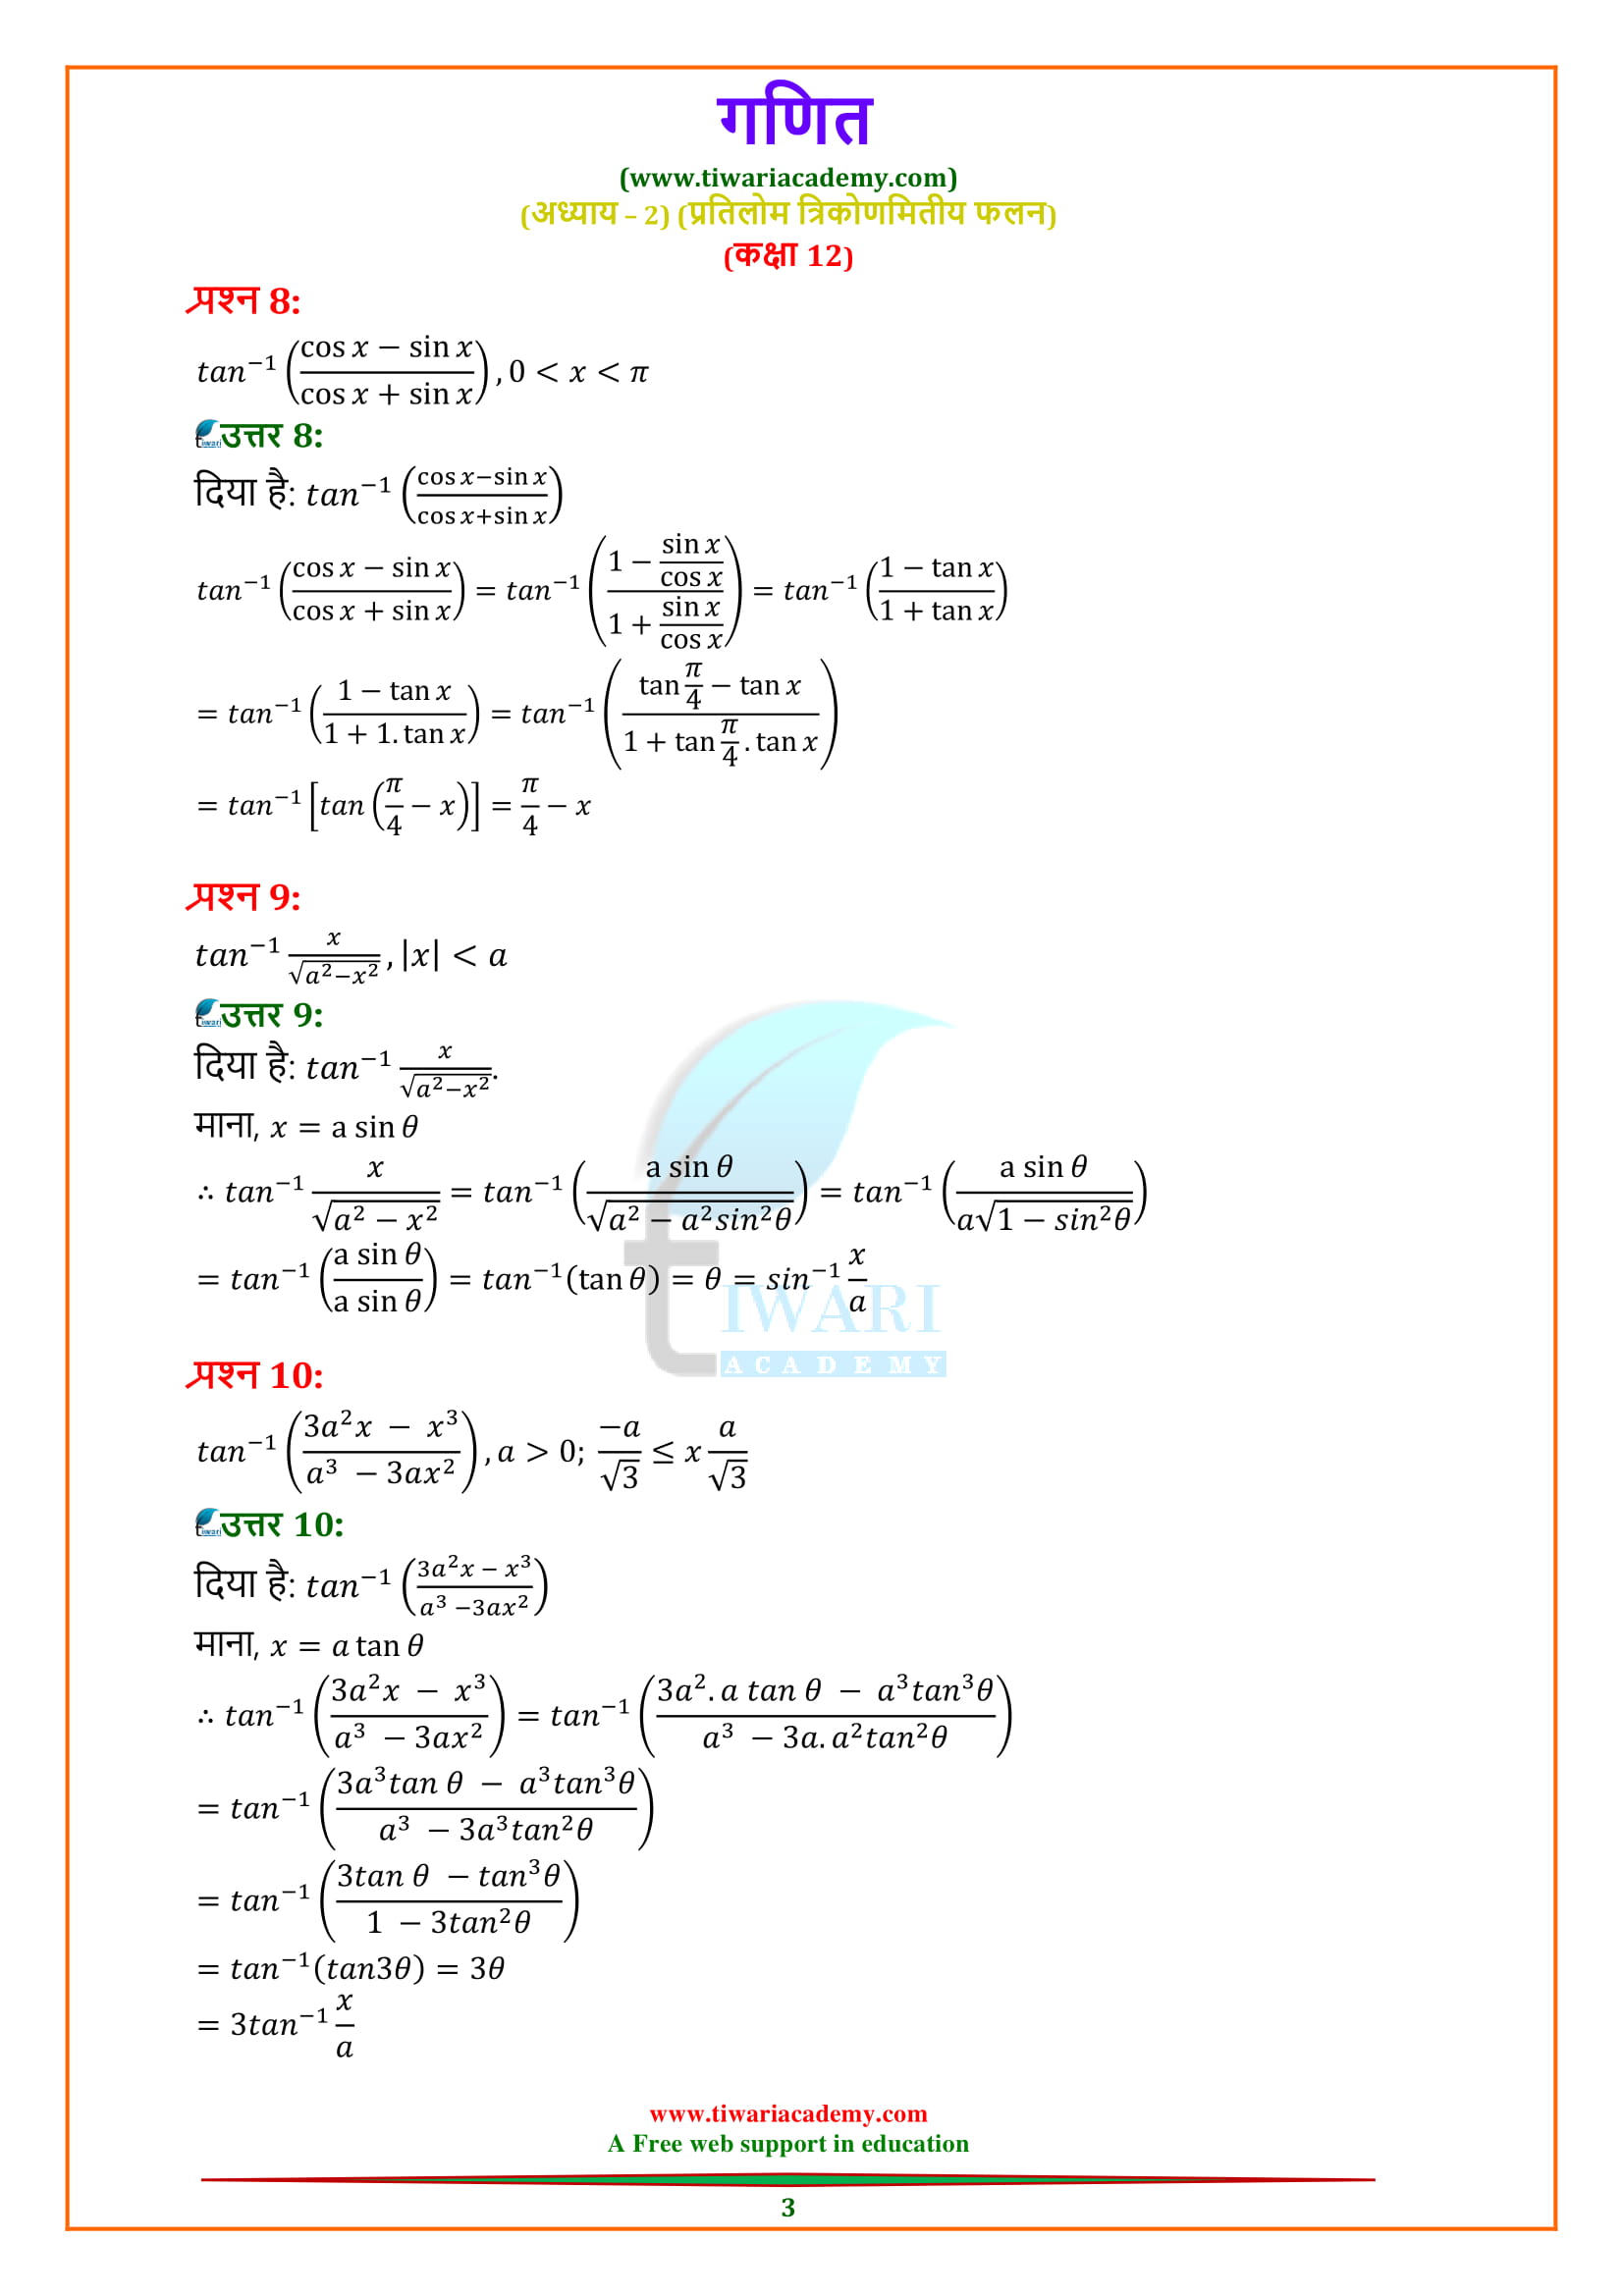 Class 12 Maths Chapter 2 Exercise 2.2 Hindi me solutions free to download